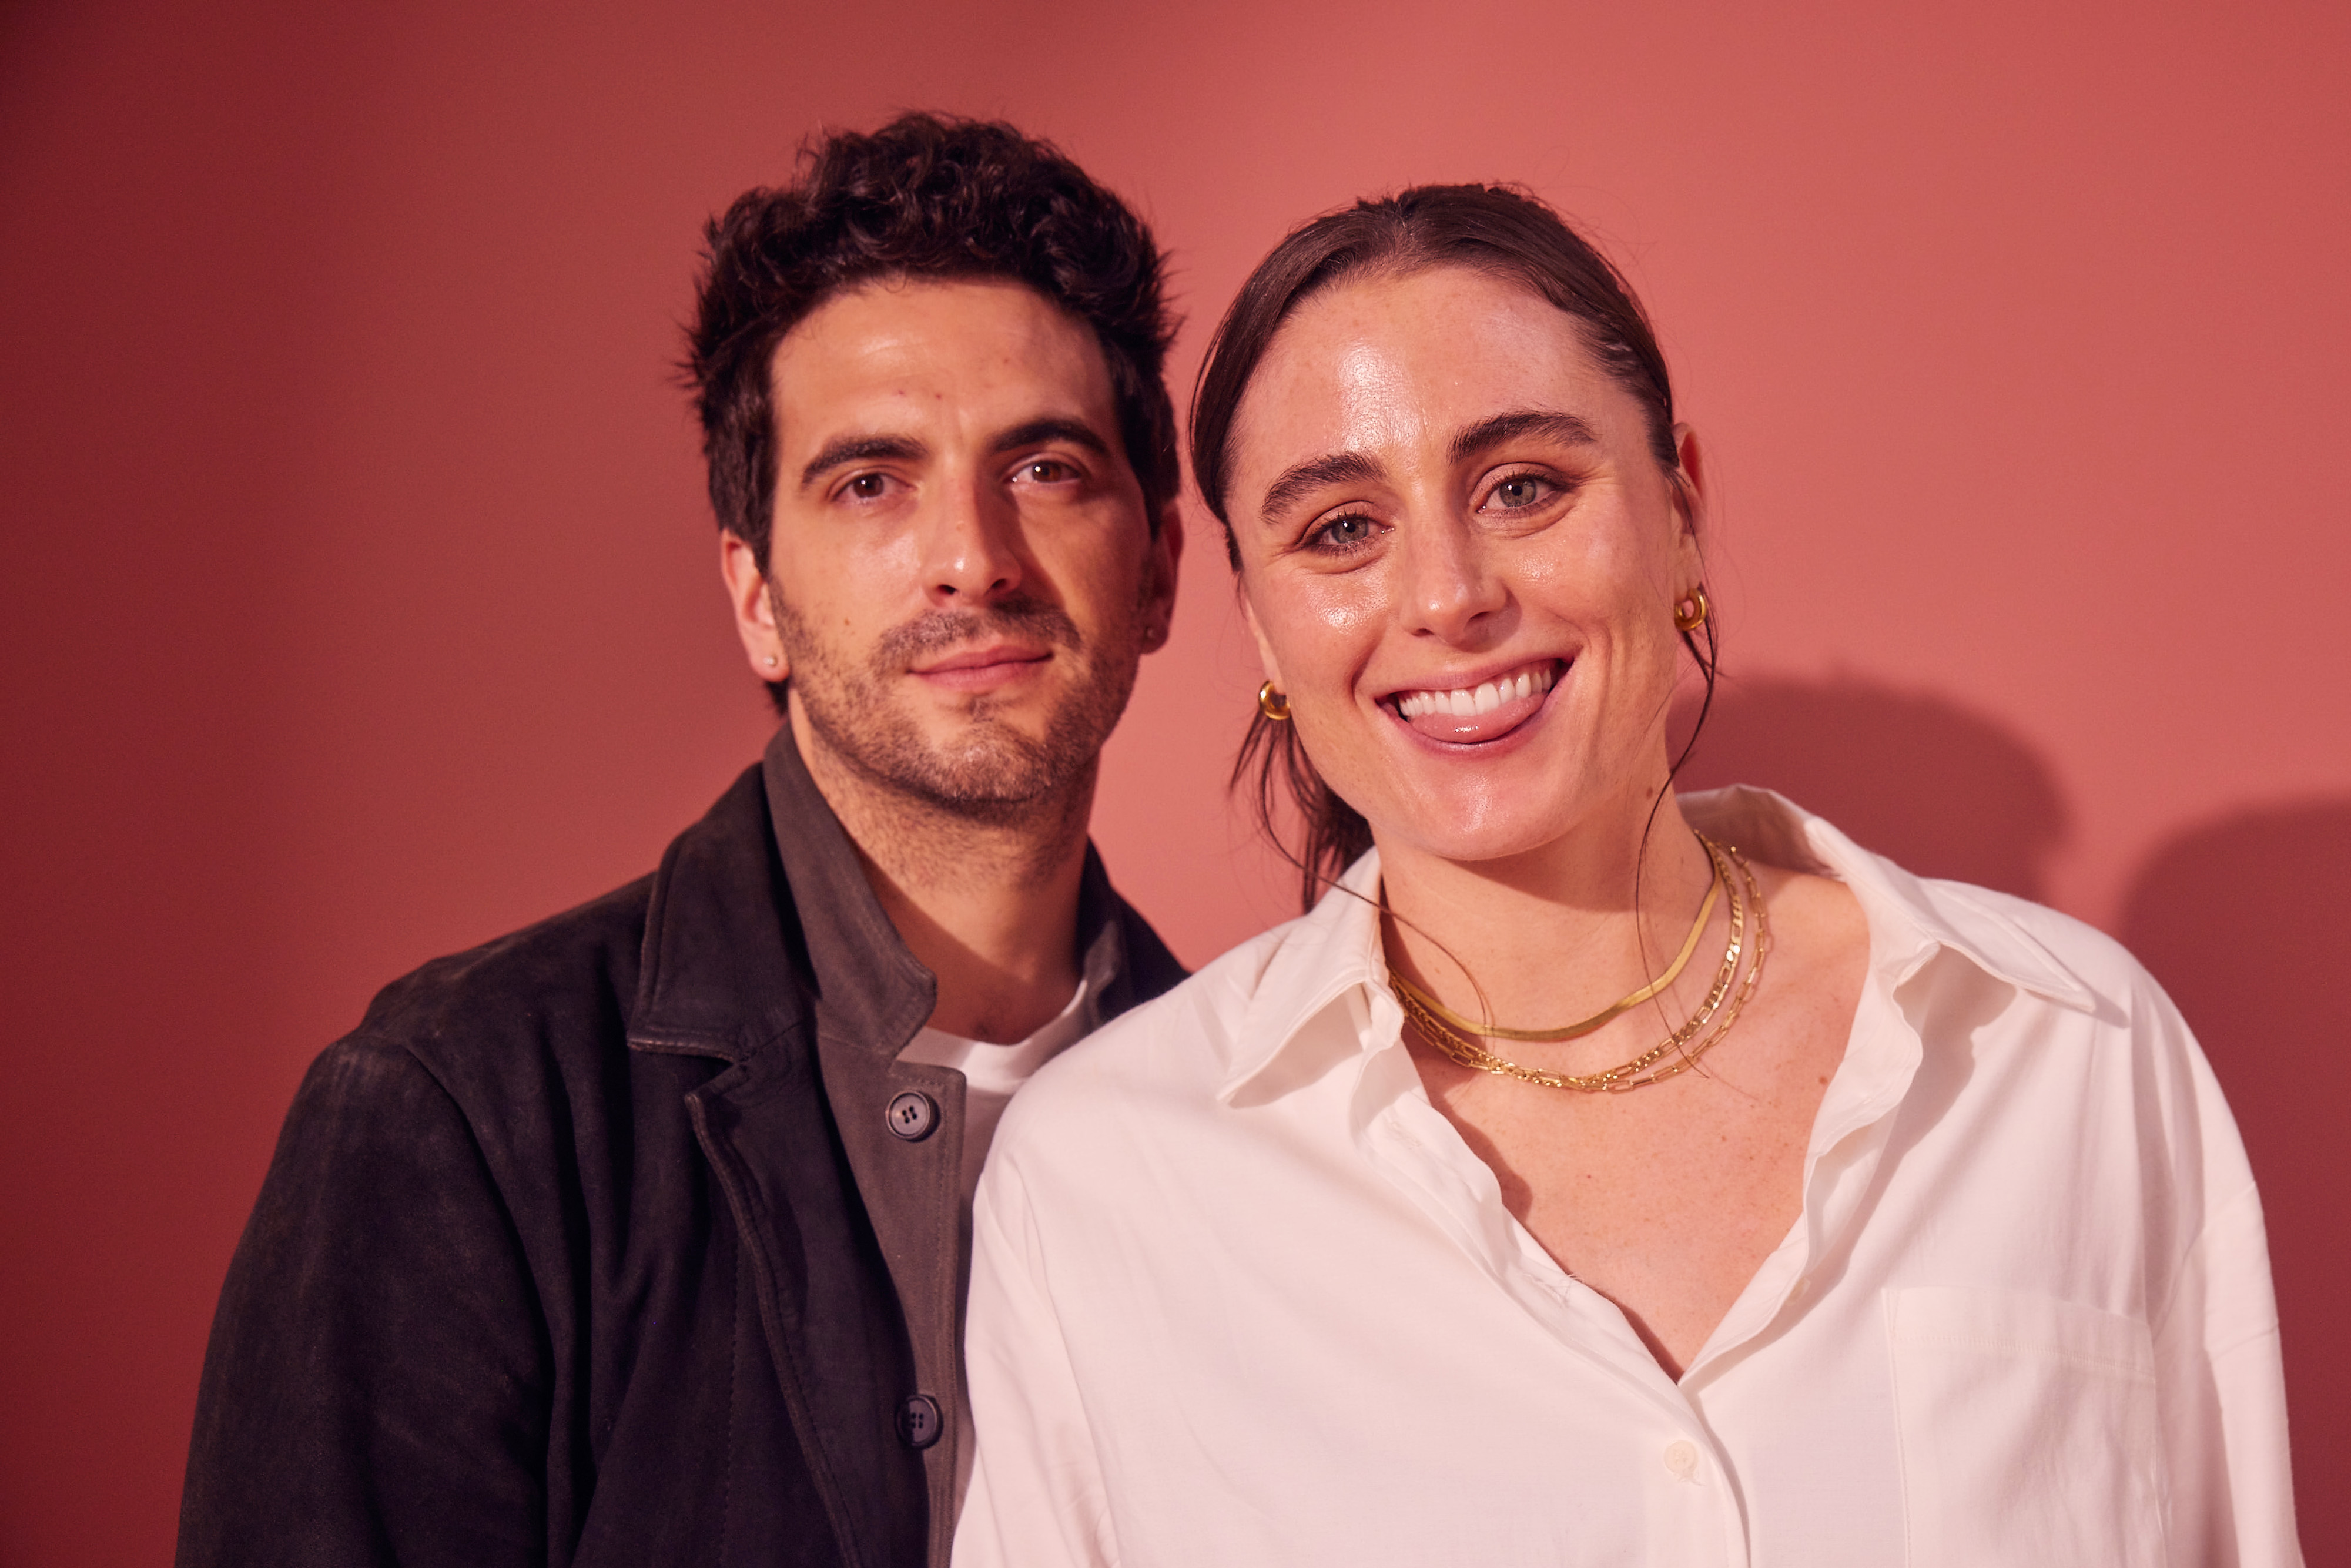 Matt Angel and Suzanne Coote of 'The Wrath of Becky' pose for a portrait at the 2023 SXSW Film Festival Portrait Studio on March 11, 2023 in Austin, Texas. | Source: Getty Images